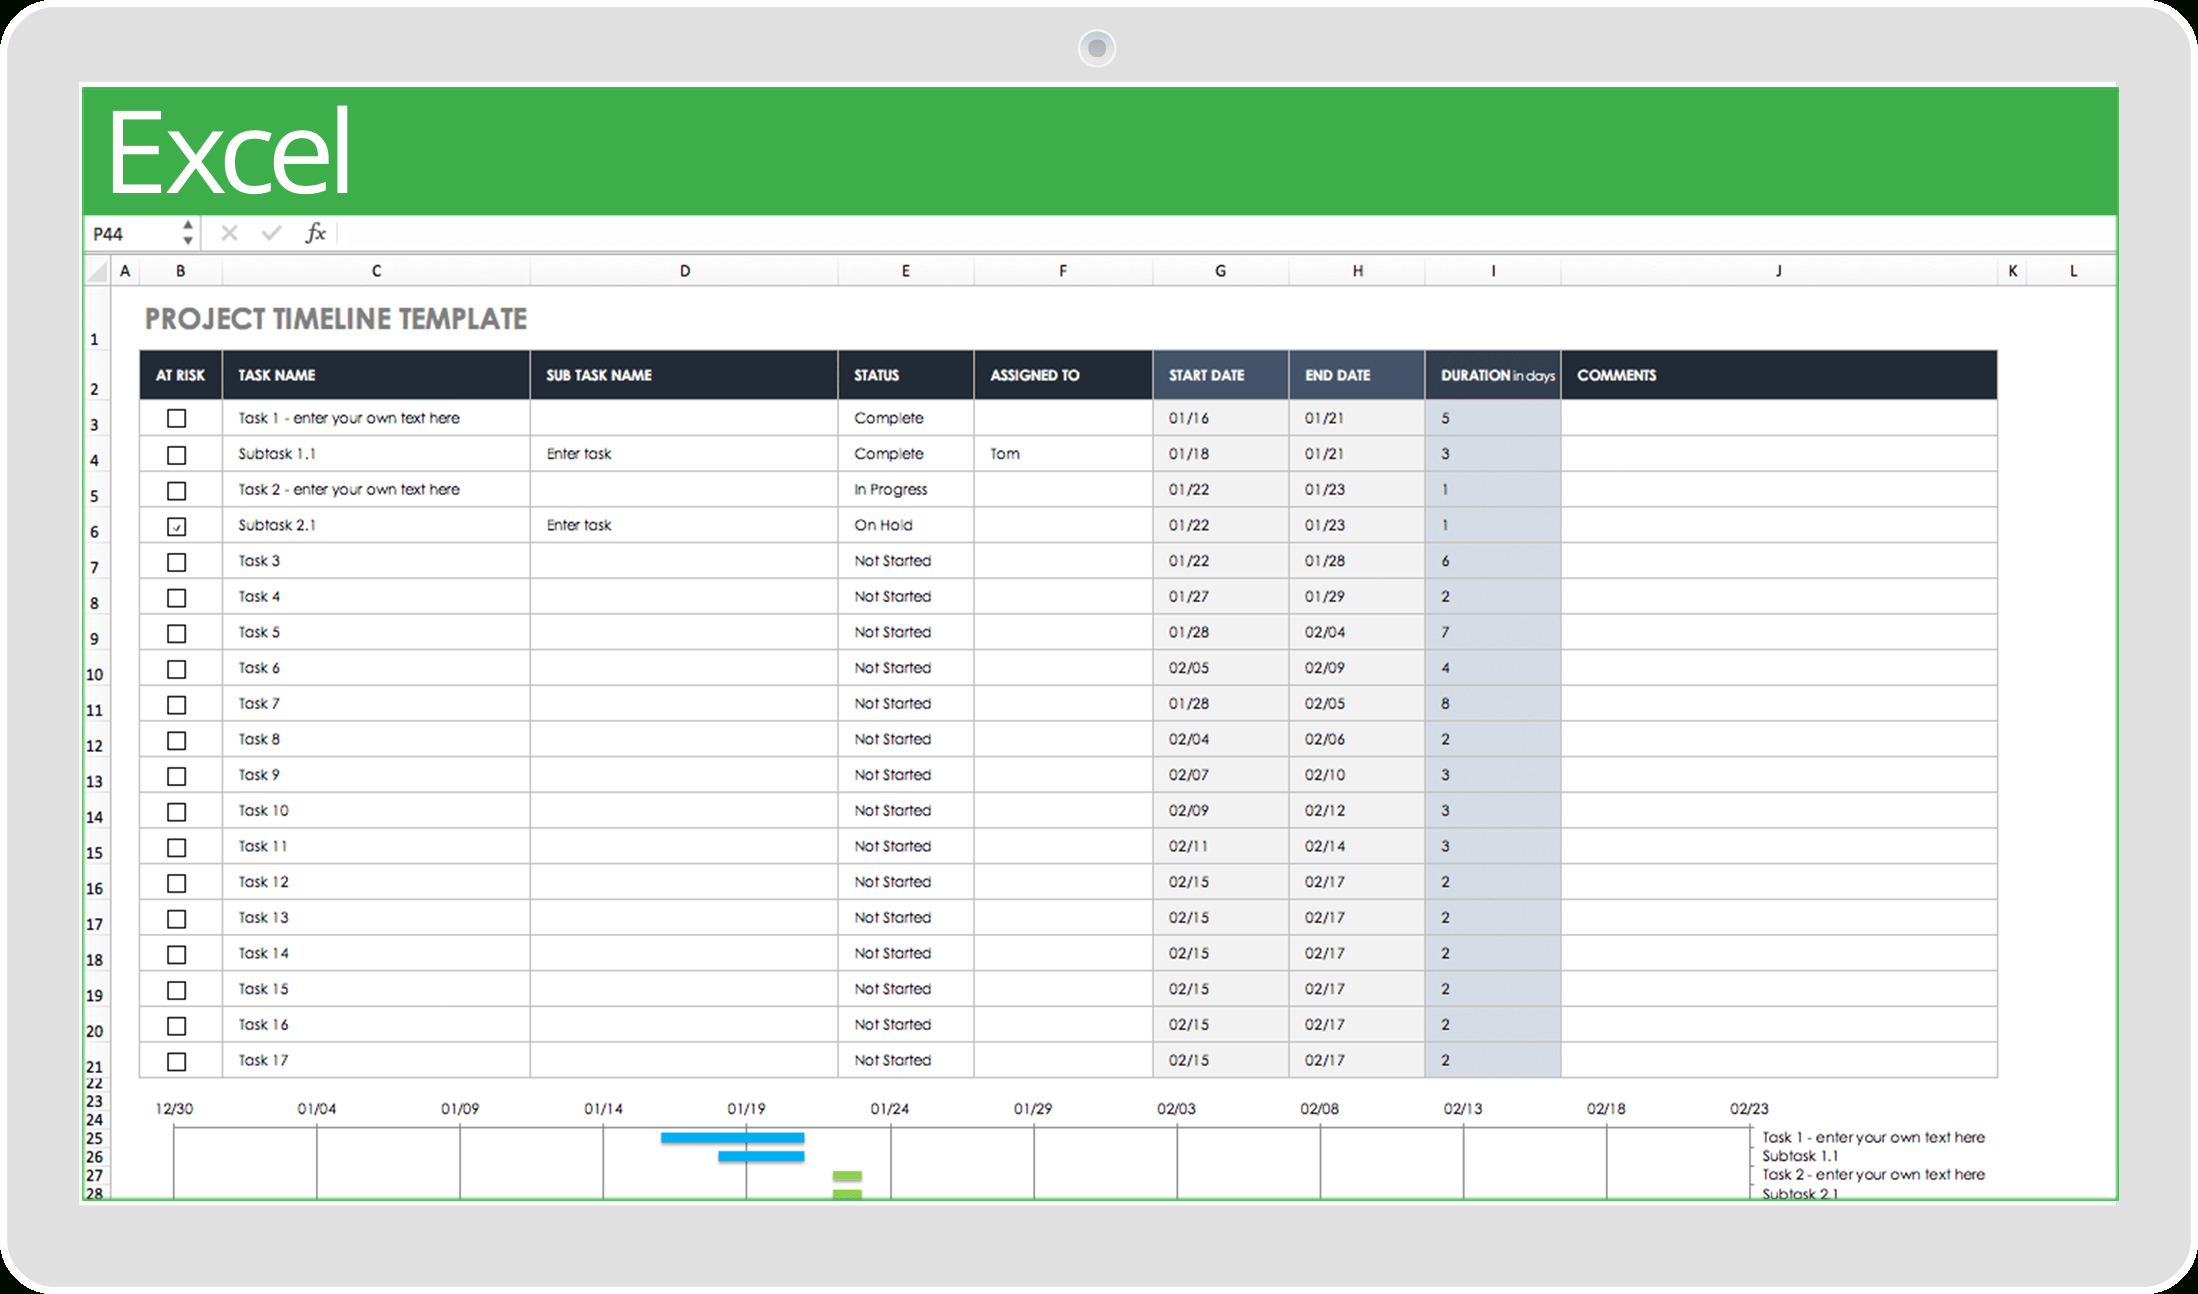 32 Free Excel Spreadsheet Templates | Smartsheet For Free Daily Sales Report Excel Template